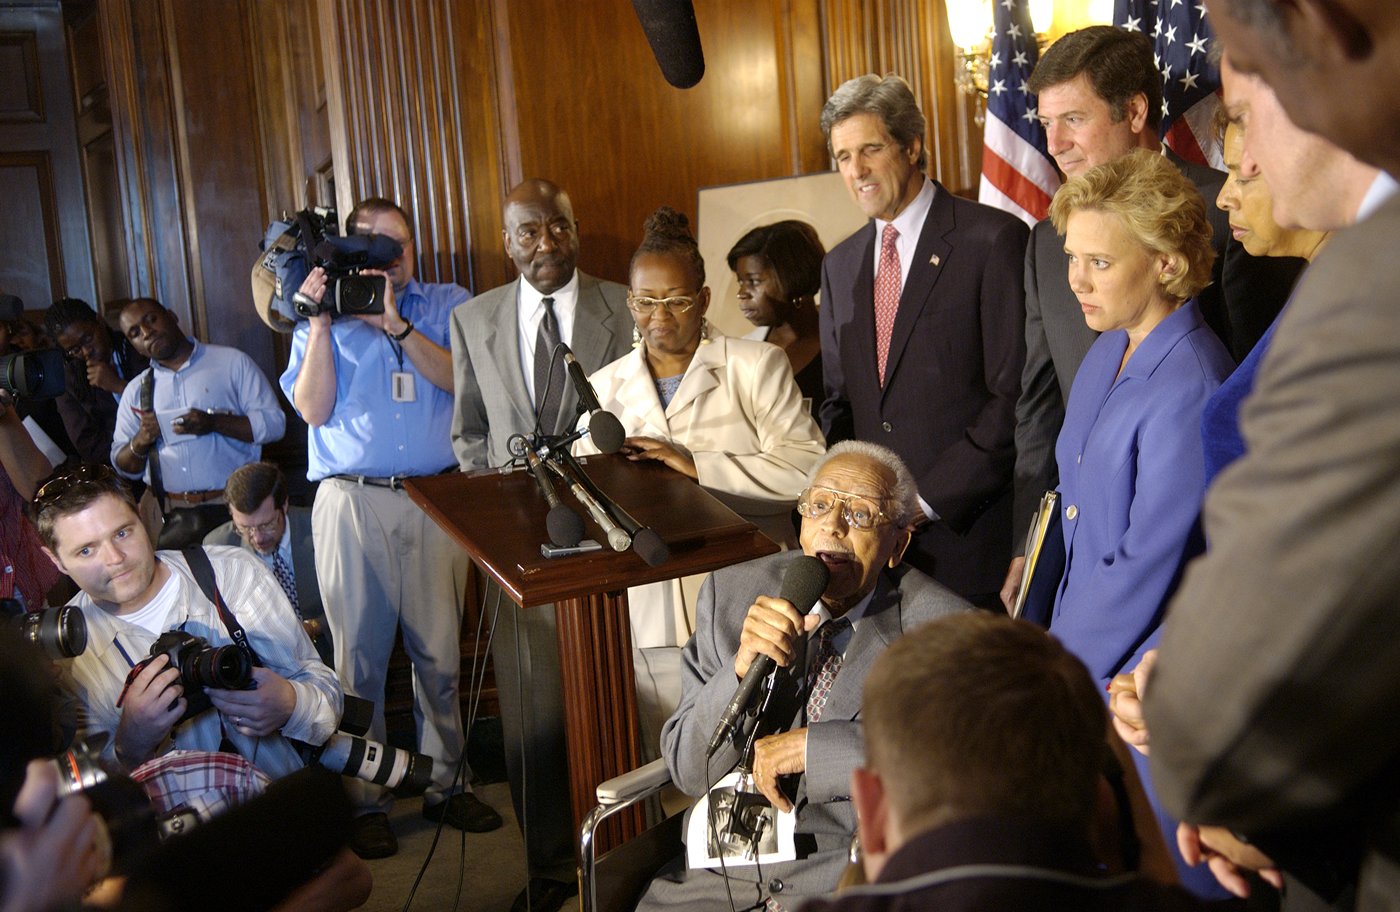 In 2005, 80 US Senators signed a non-binding resolution apologizing for the Senate's failure to outlaw lynching. (Doria D. Johnson, descendent of Andrew Crawford, is standing behind the woman in the white dress. Dr. James Cameron, lynching survivor, is speaking at lower right.)